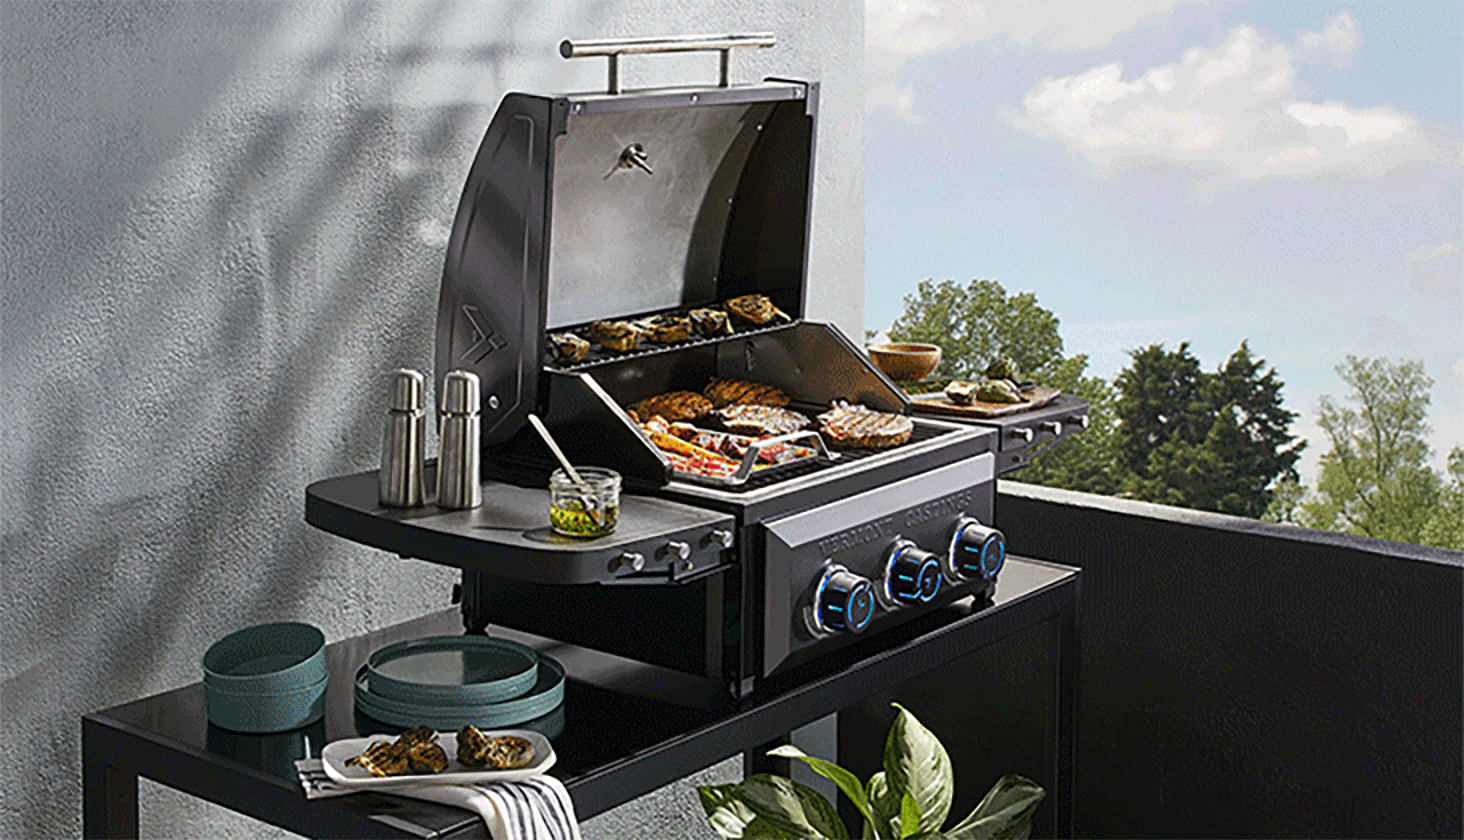 Vermont Castings Ascent Electric Grill with tabletop side panels open. 